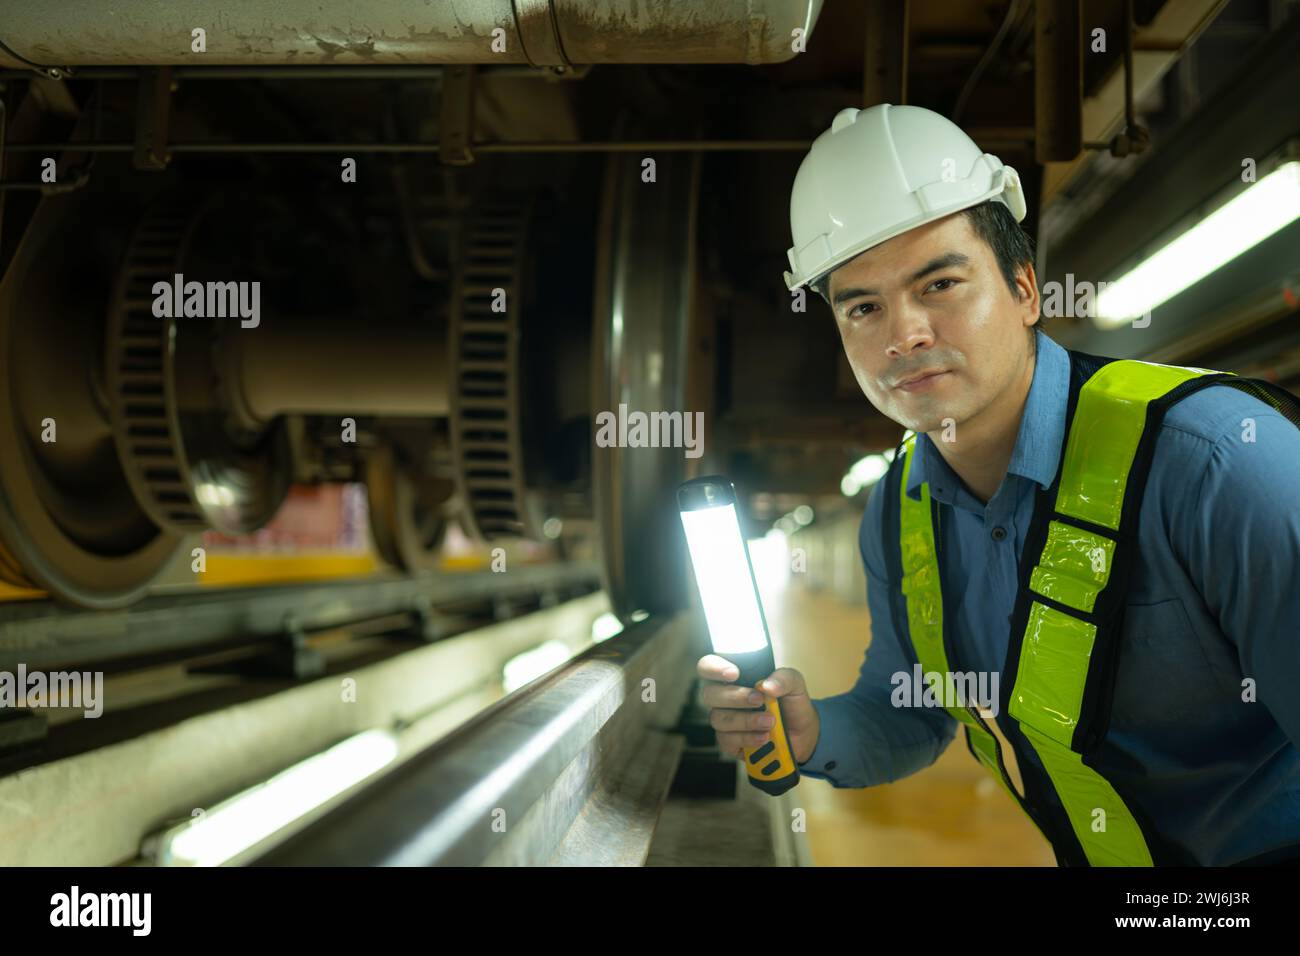 Engineers for electric trains After detecting difficulties with the electric train's machinery use searchlights to locate and ch Stock Photo